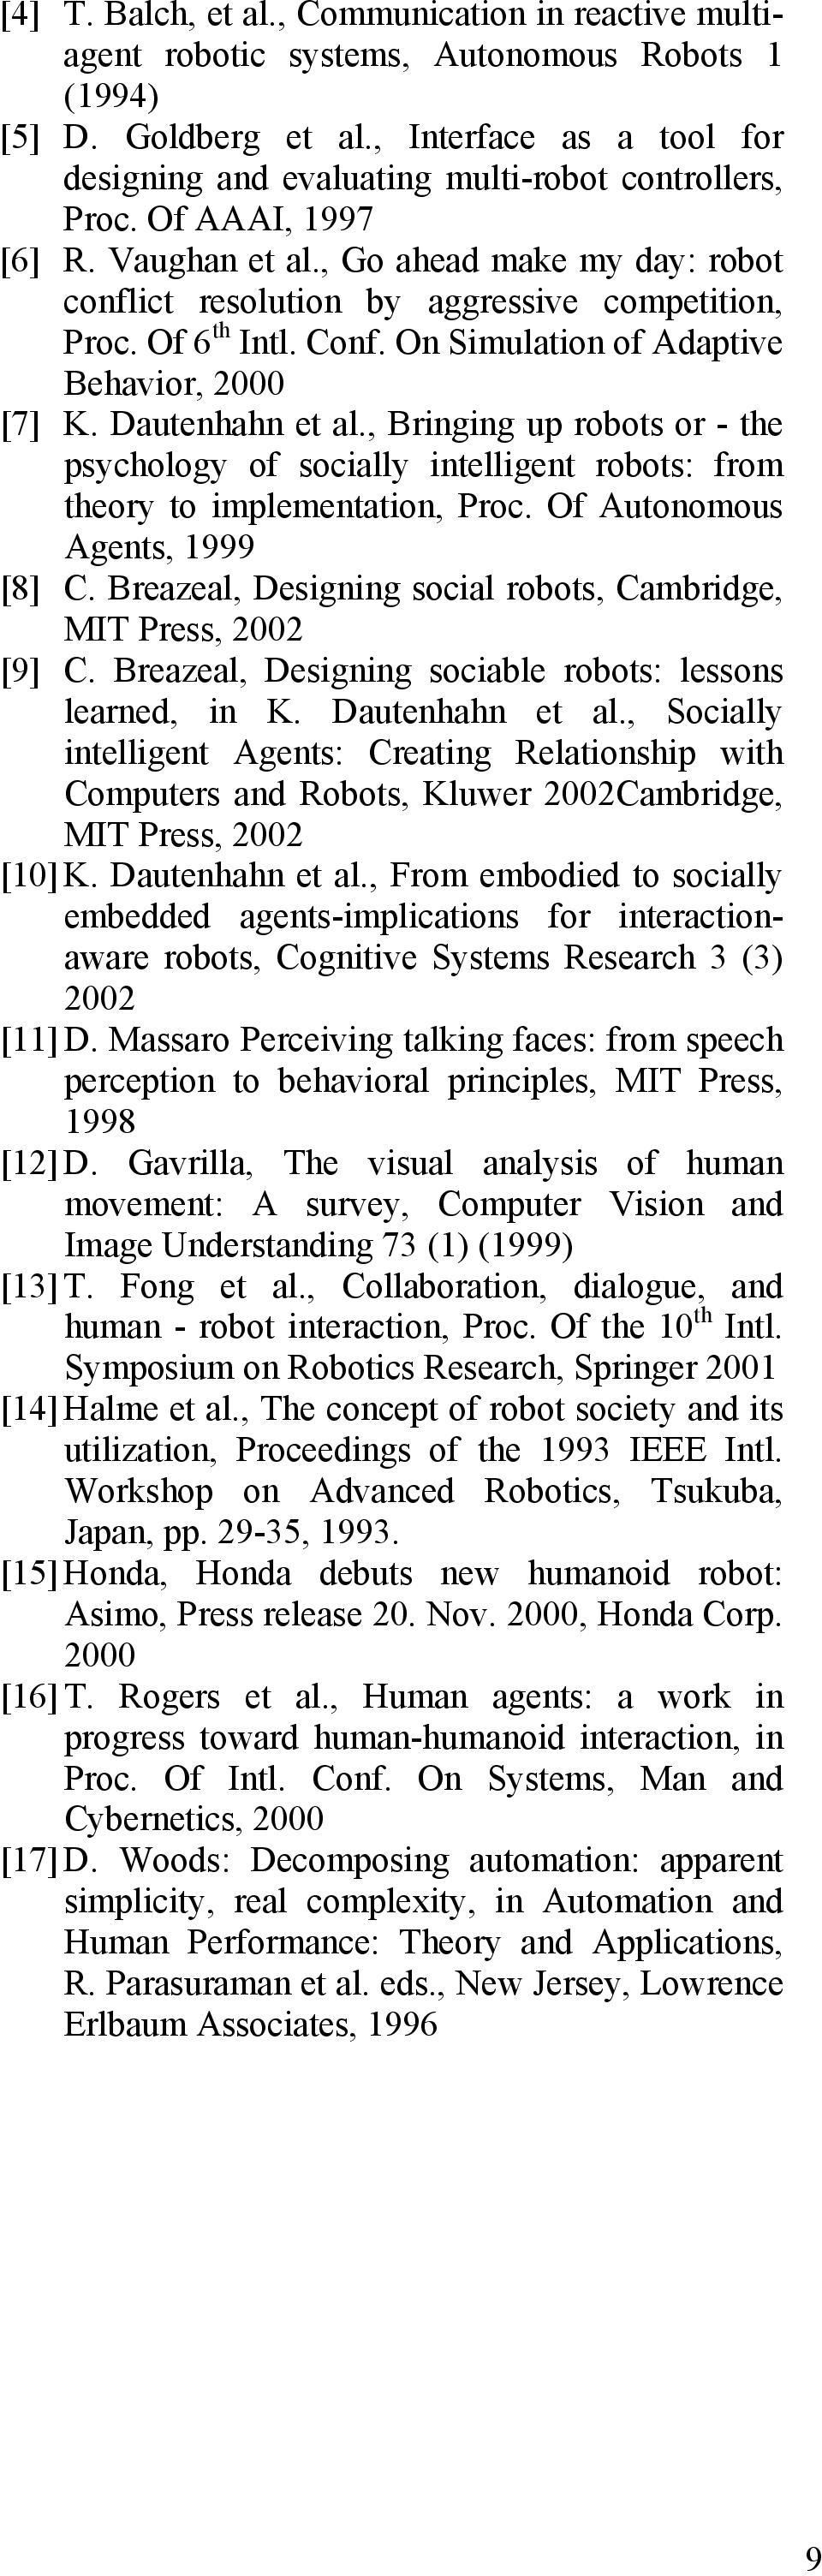 Of 6 th Intl. Conf. On Simulation of Adaptive Behavior, 2000 [7] K. Dautenhahn et al., Bringing up robots or - the psychology of socially intelligent robots: from theory to implementation, Proc.